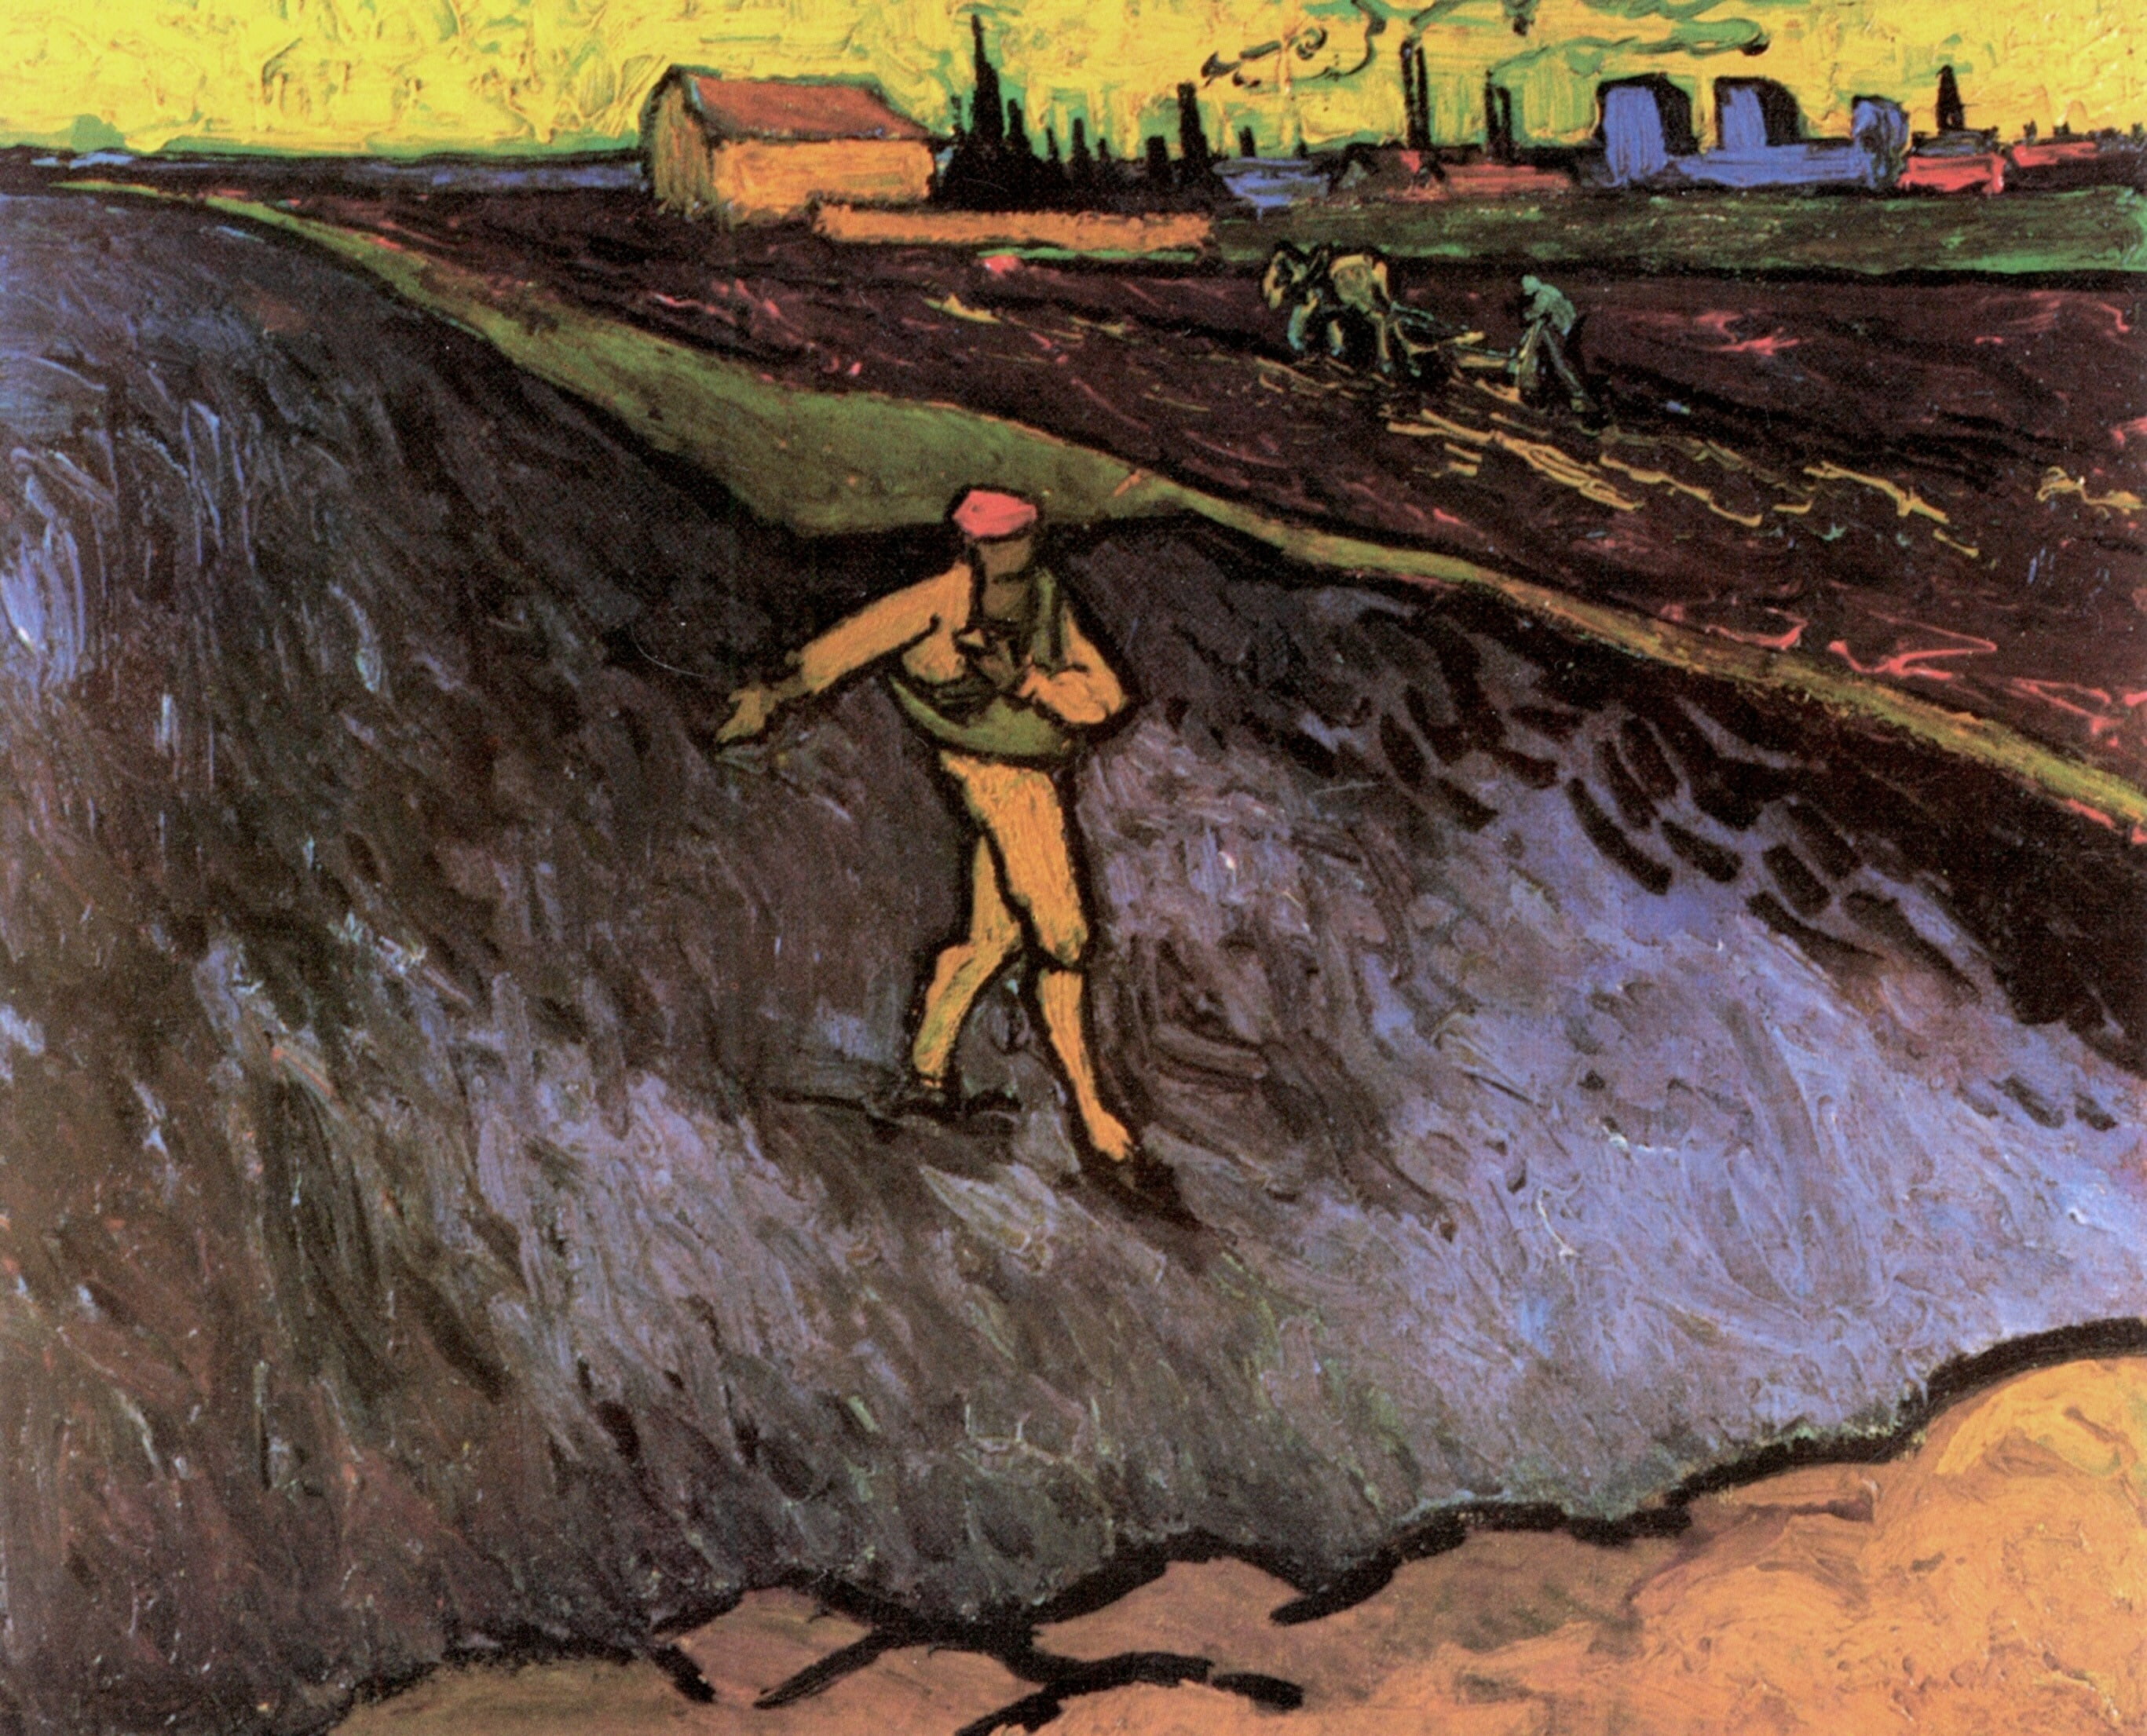 Vincent van Gogh, in the Background, Outskirts of Arles, The Sower